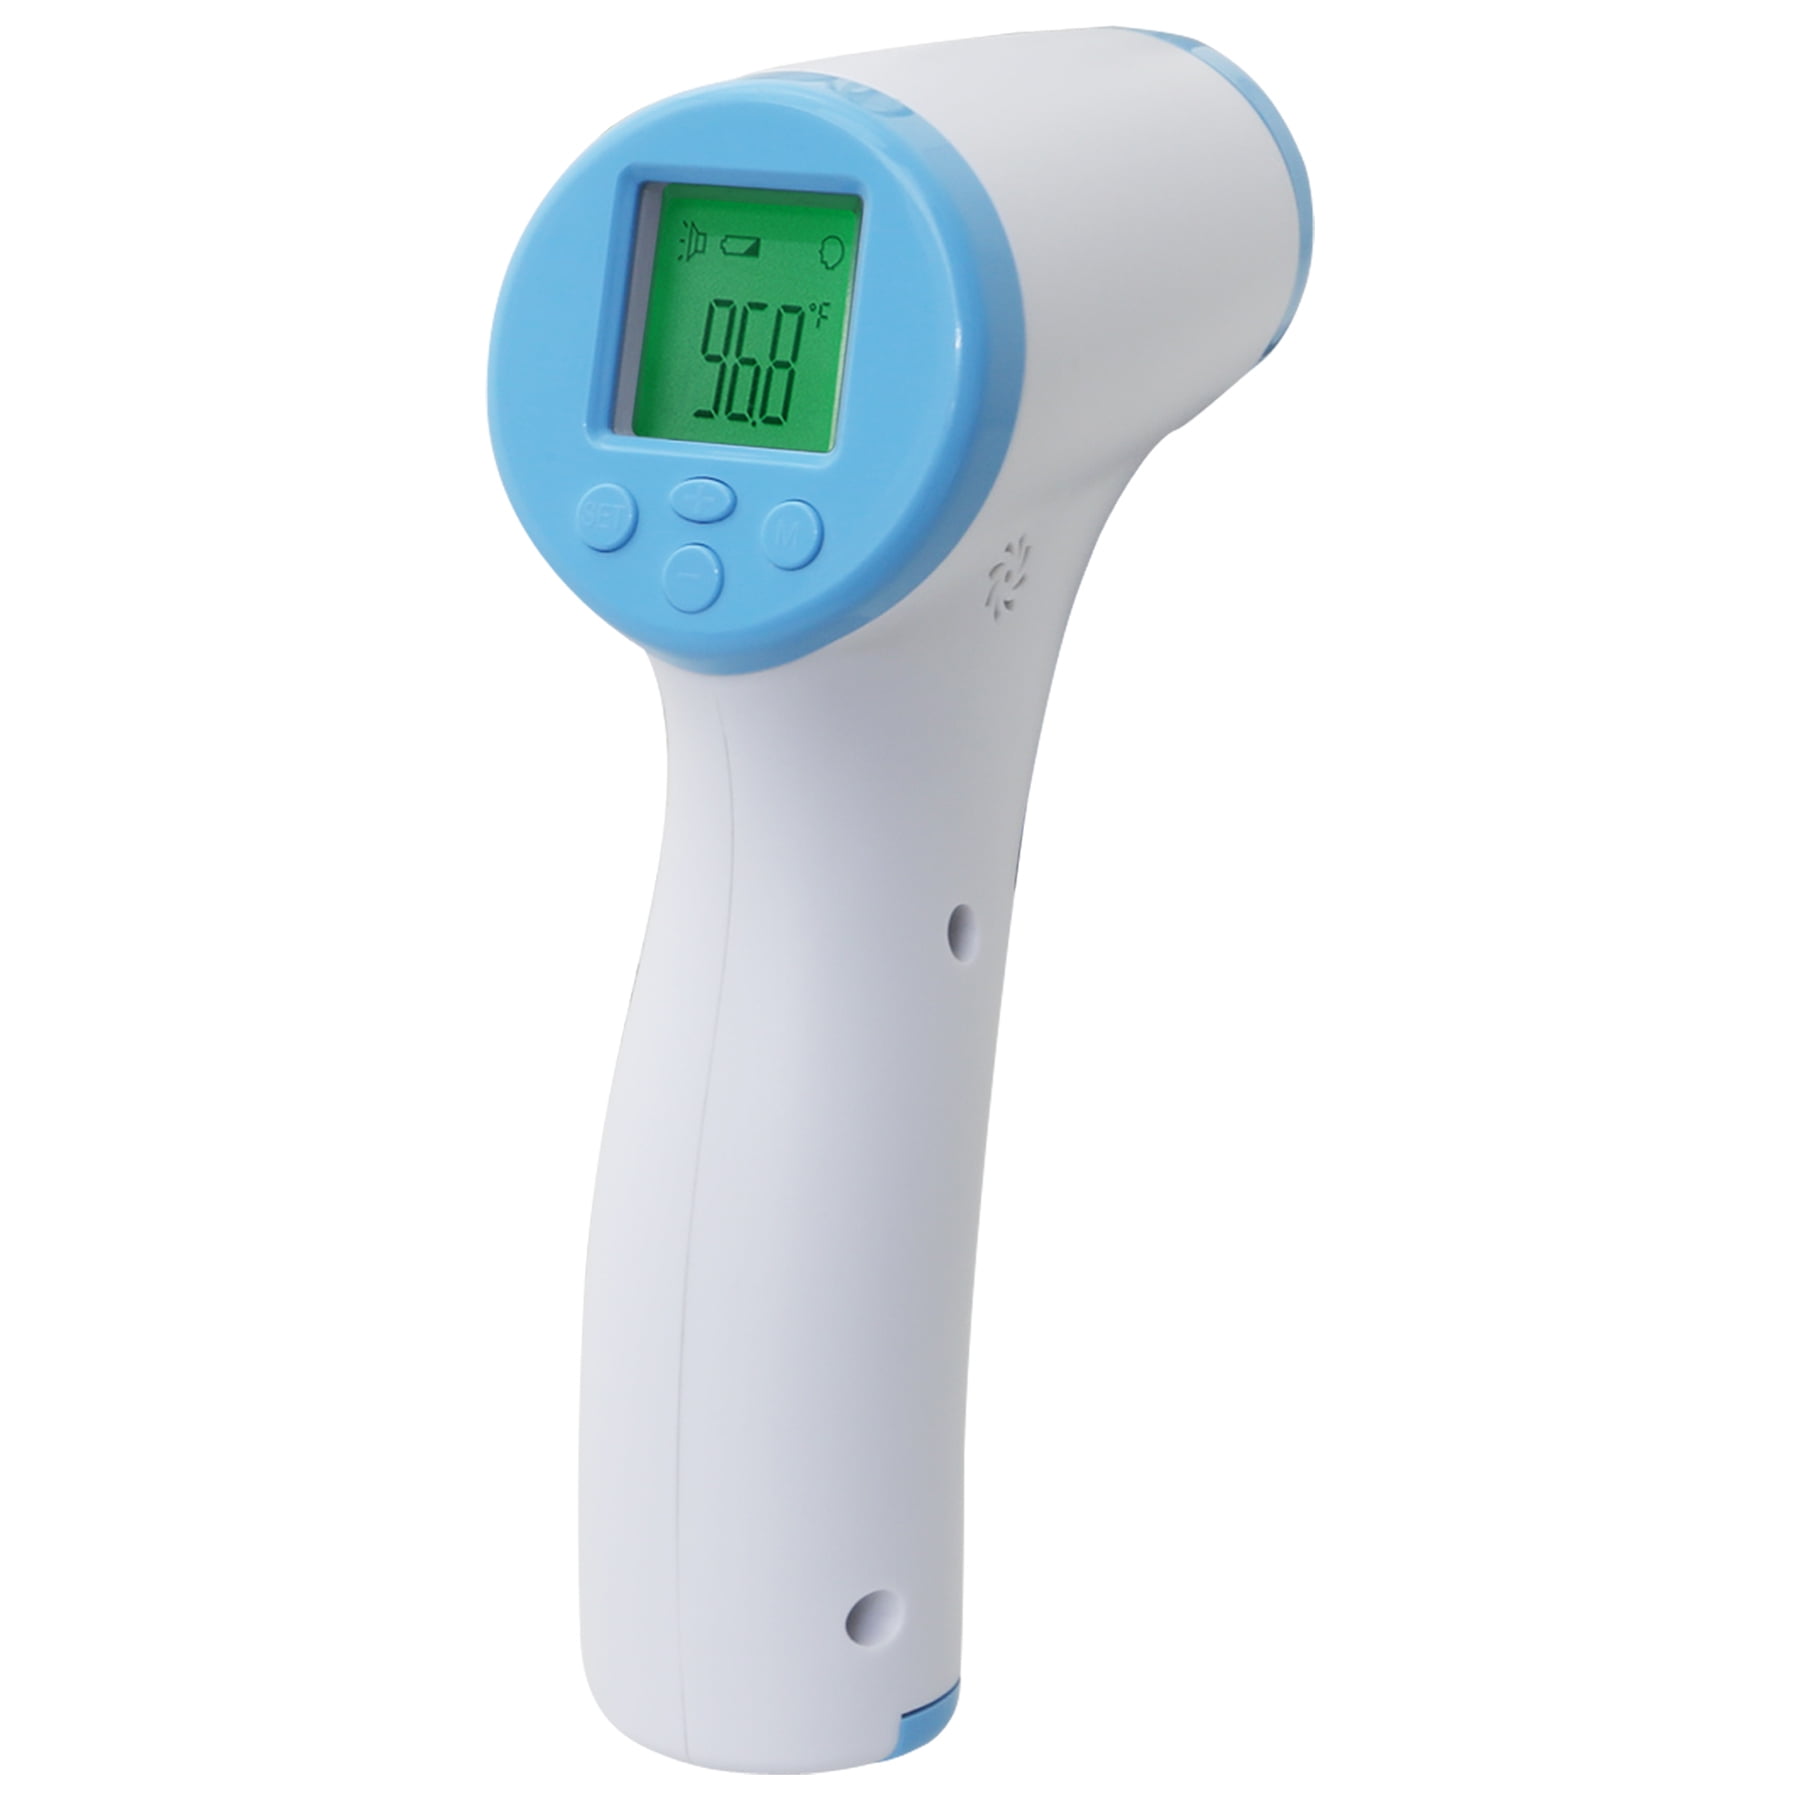 Household Digital Infrared Thermometer Size 145 X 92 X 45mm CE ROHS Approved